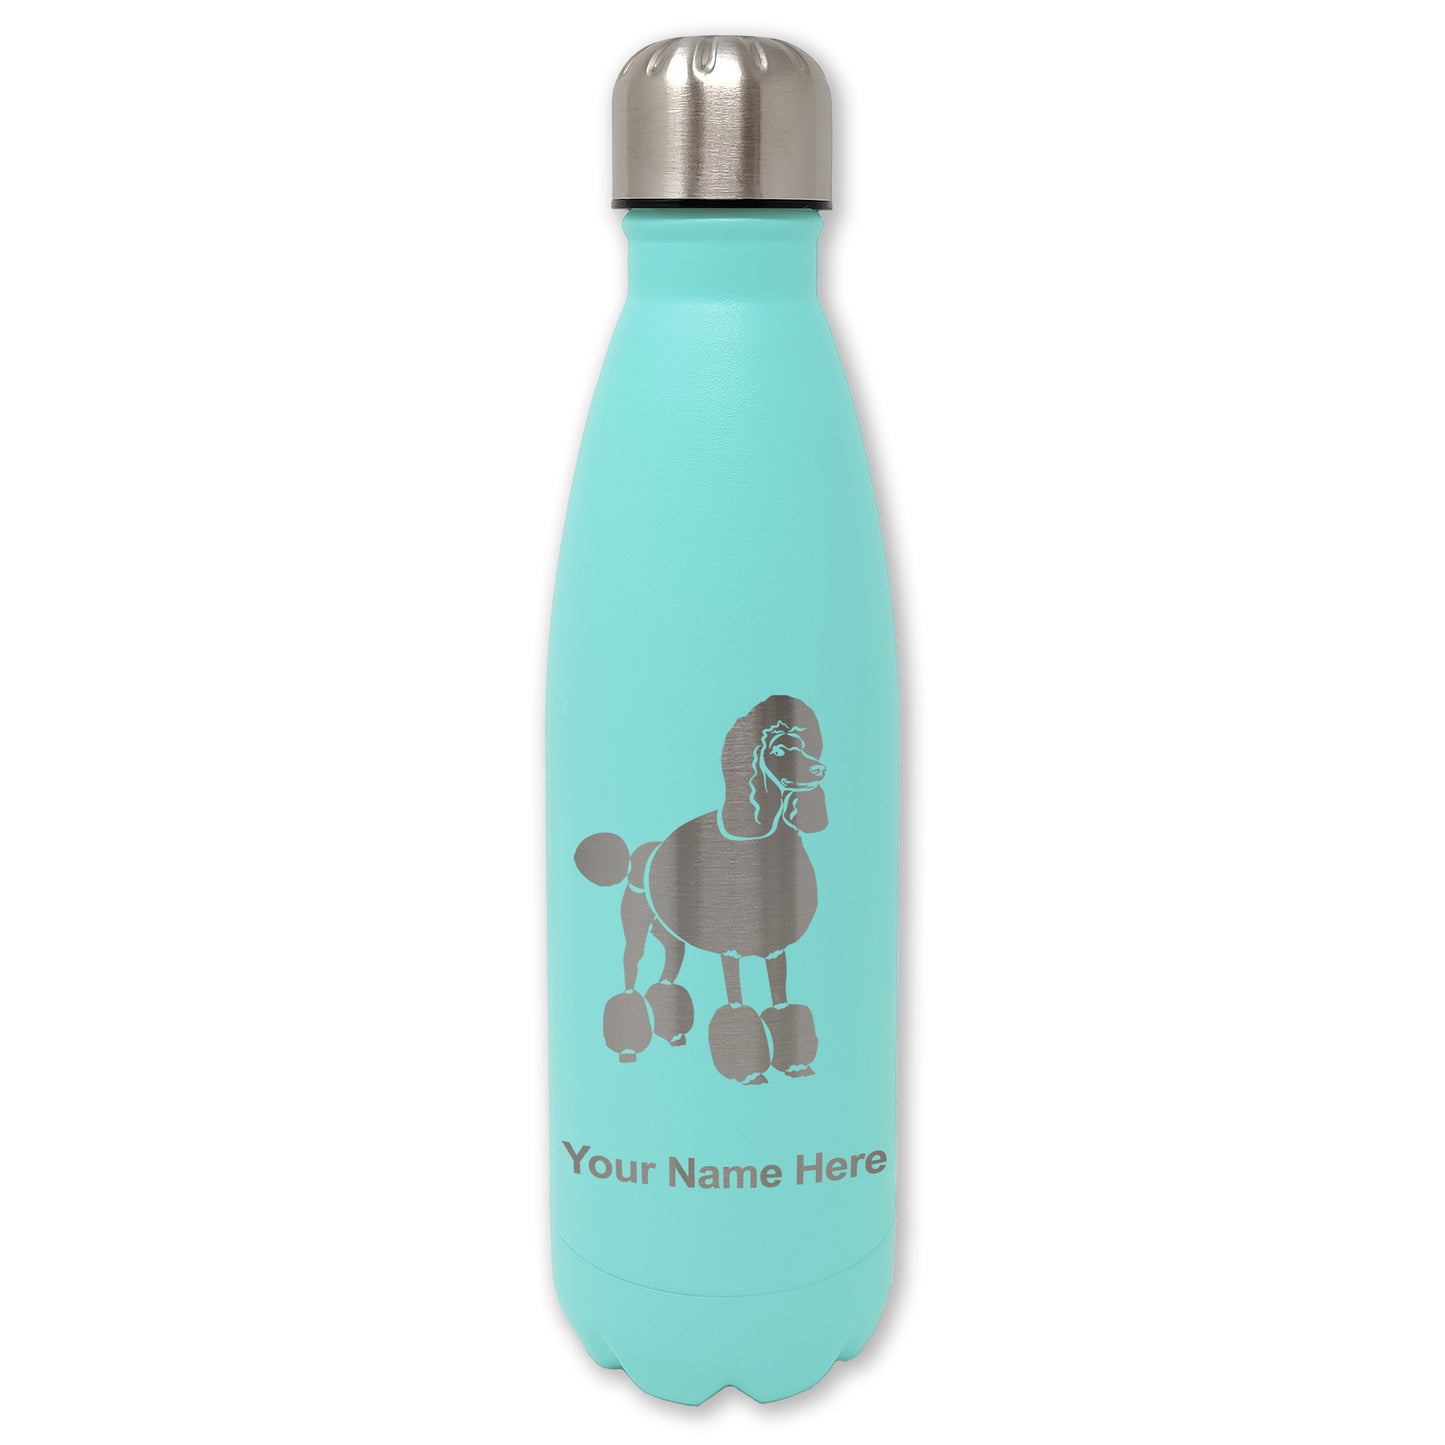 LaserGram Double Wall Water Bottle, French Poodle Dog, Personalized Engraving Included